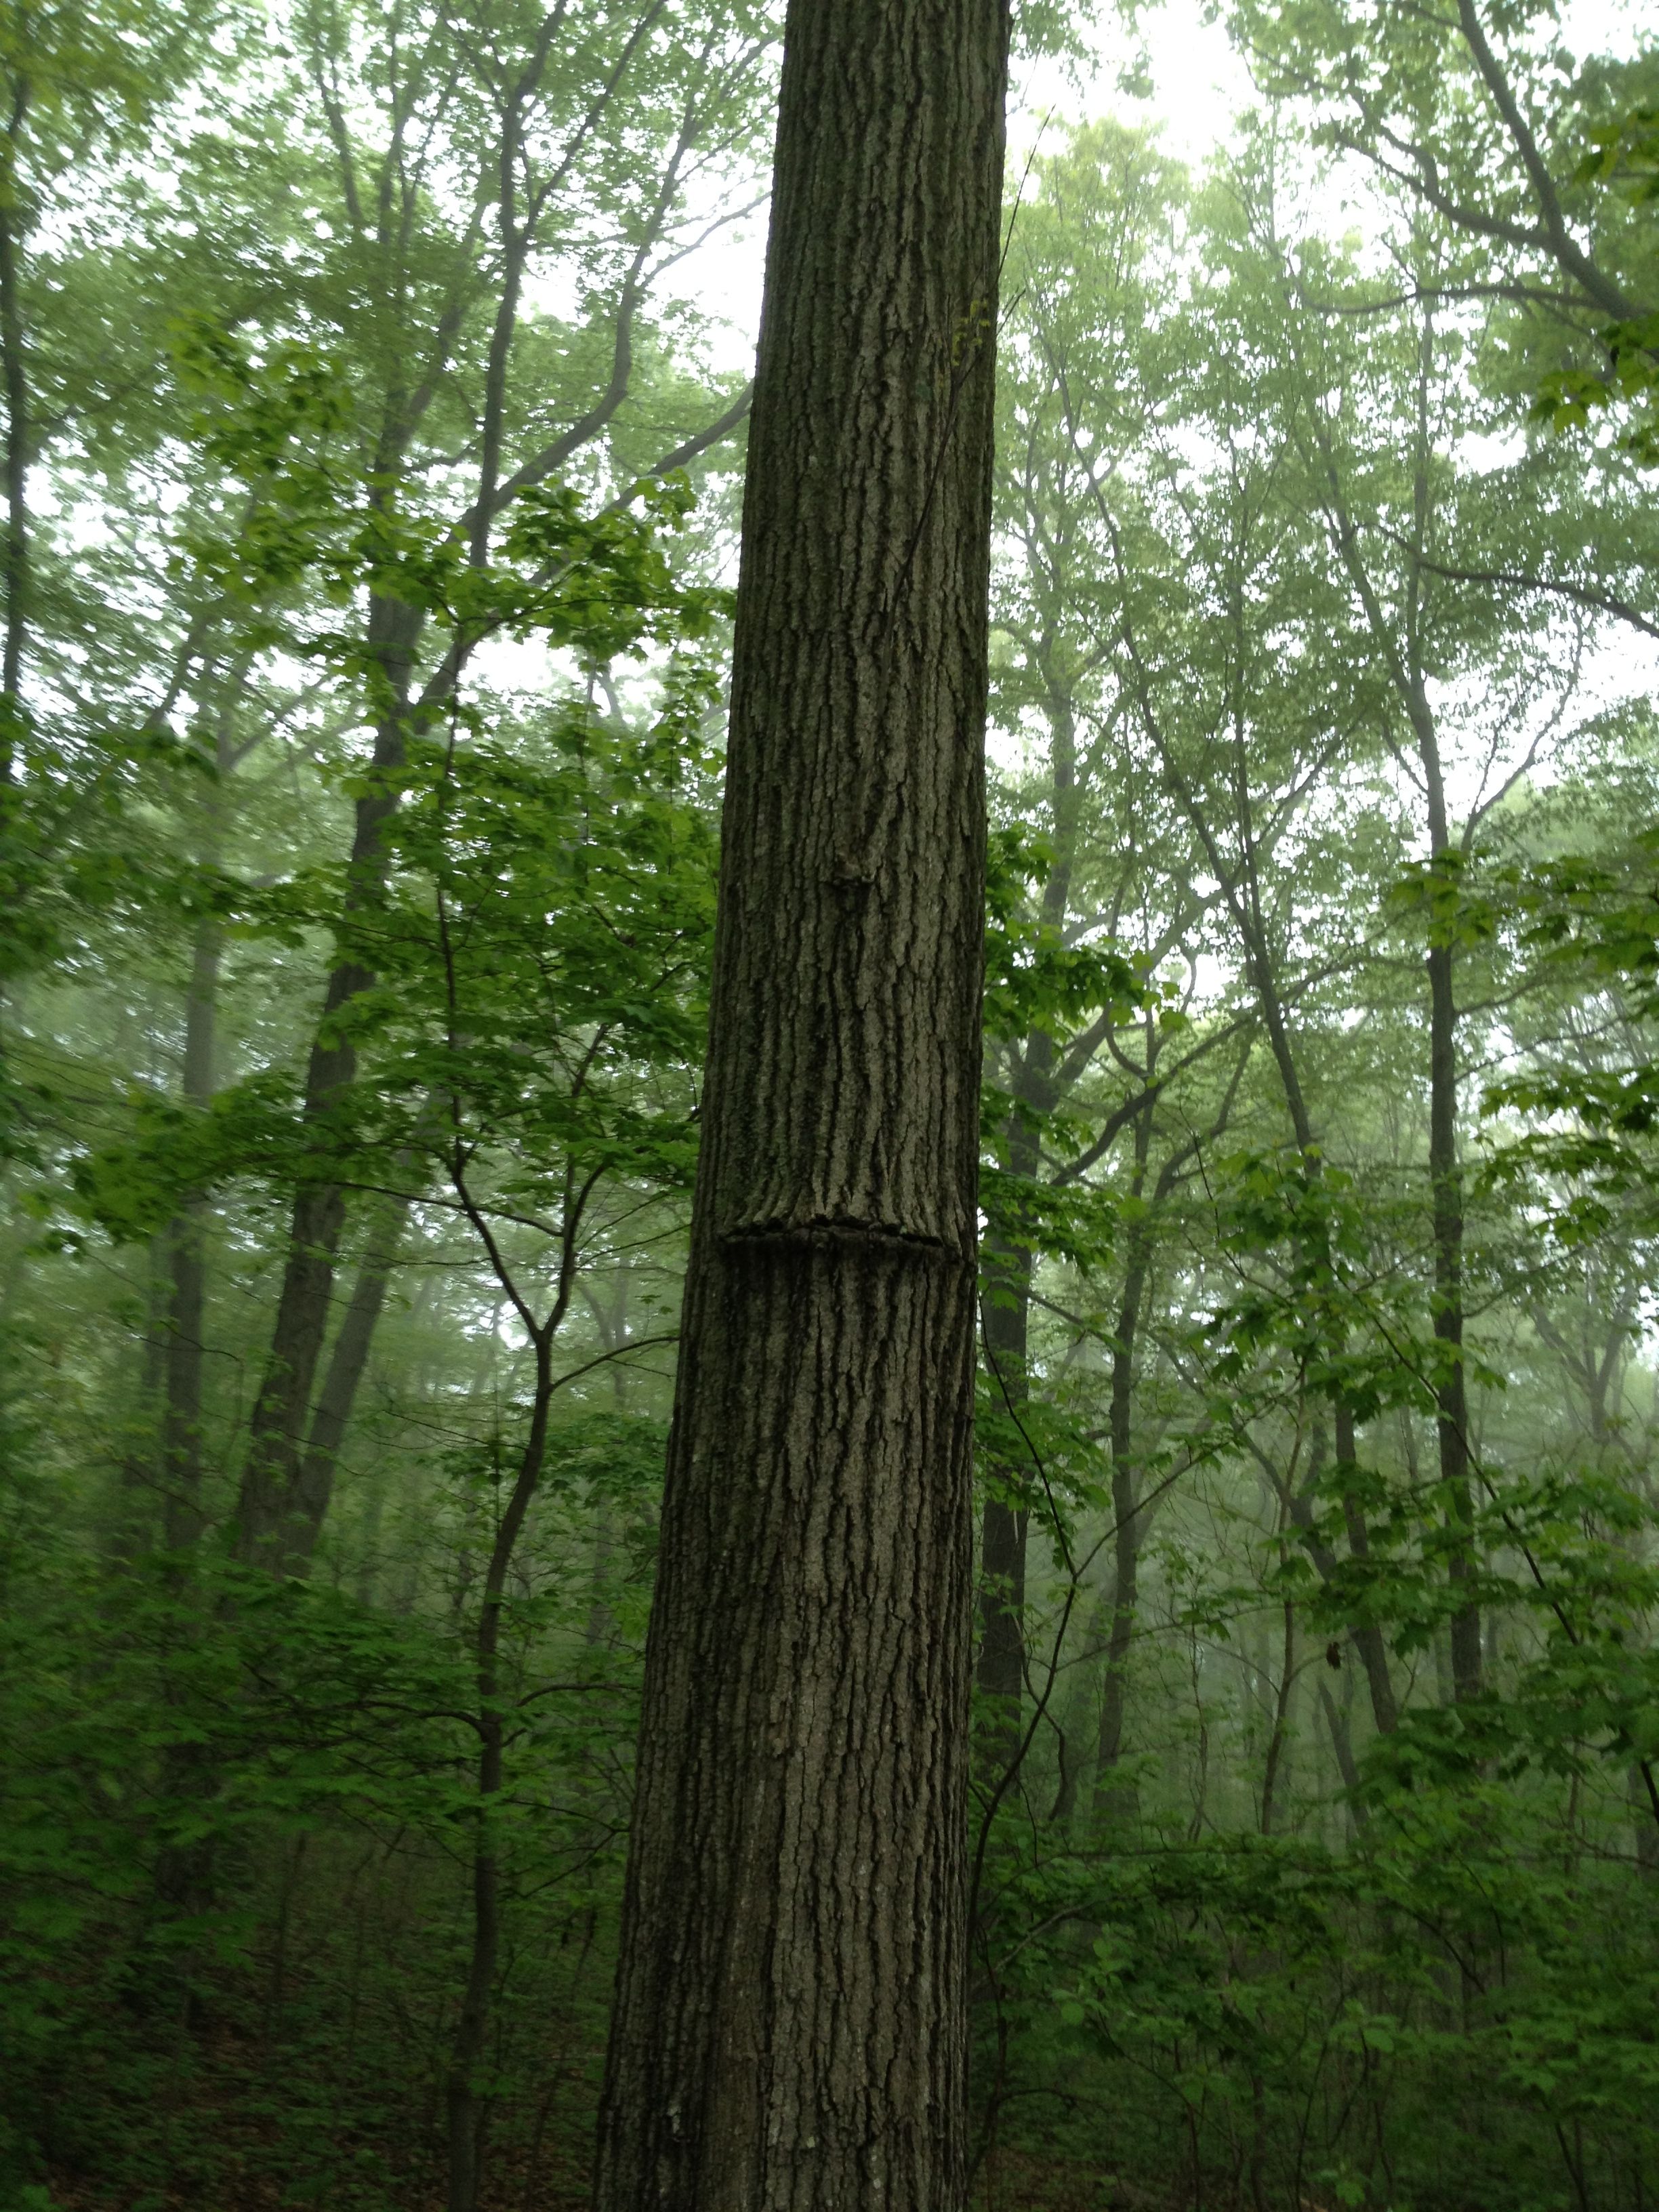 Dour-faced tree at Caumsett State Park | Long Island Mornings ...